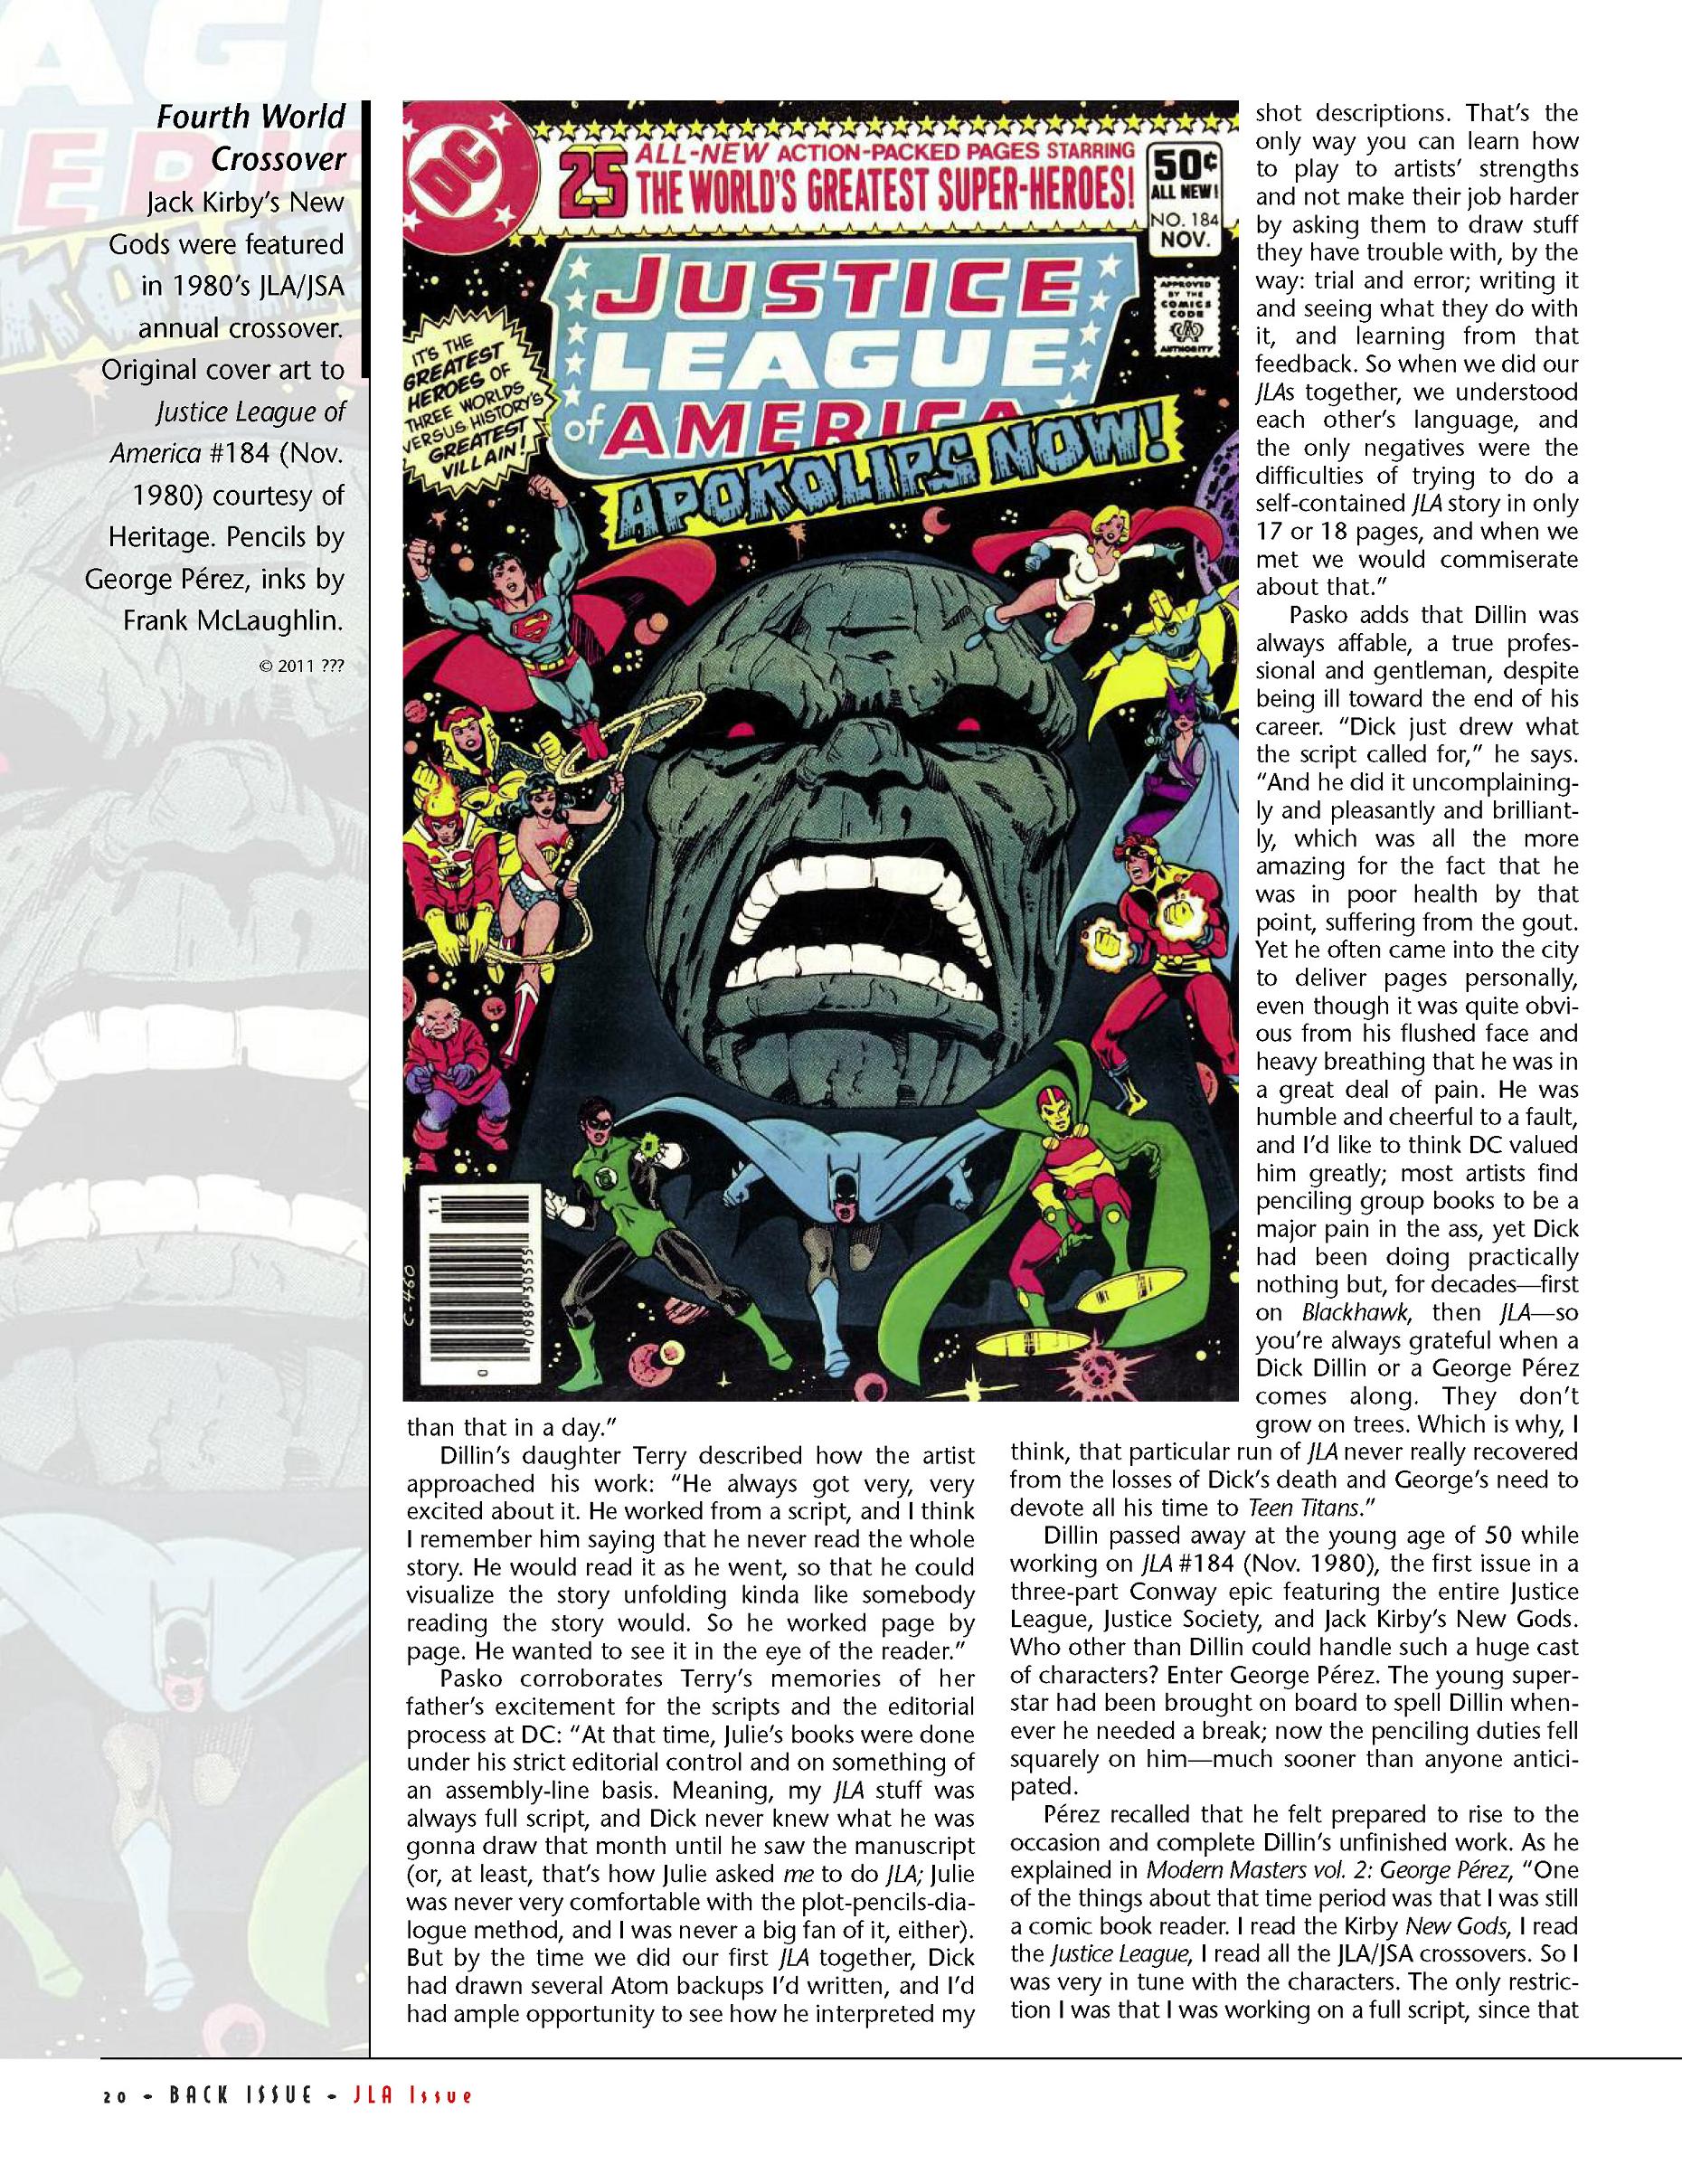 Read online Back Issue comic -  Issue #58 - 21